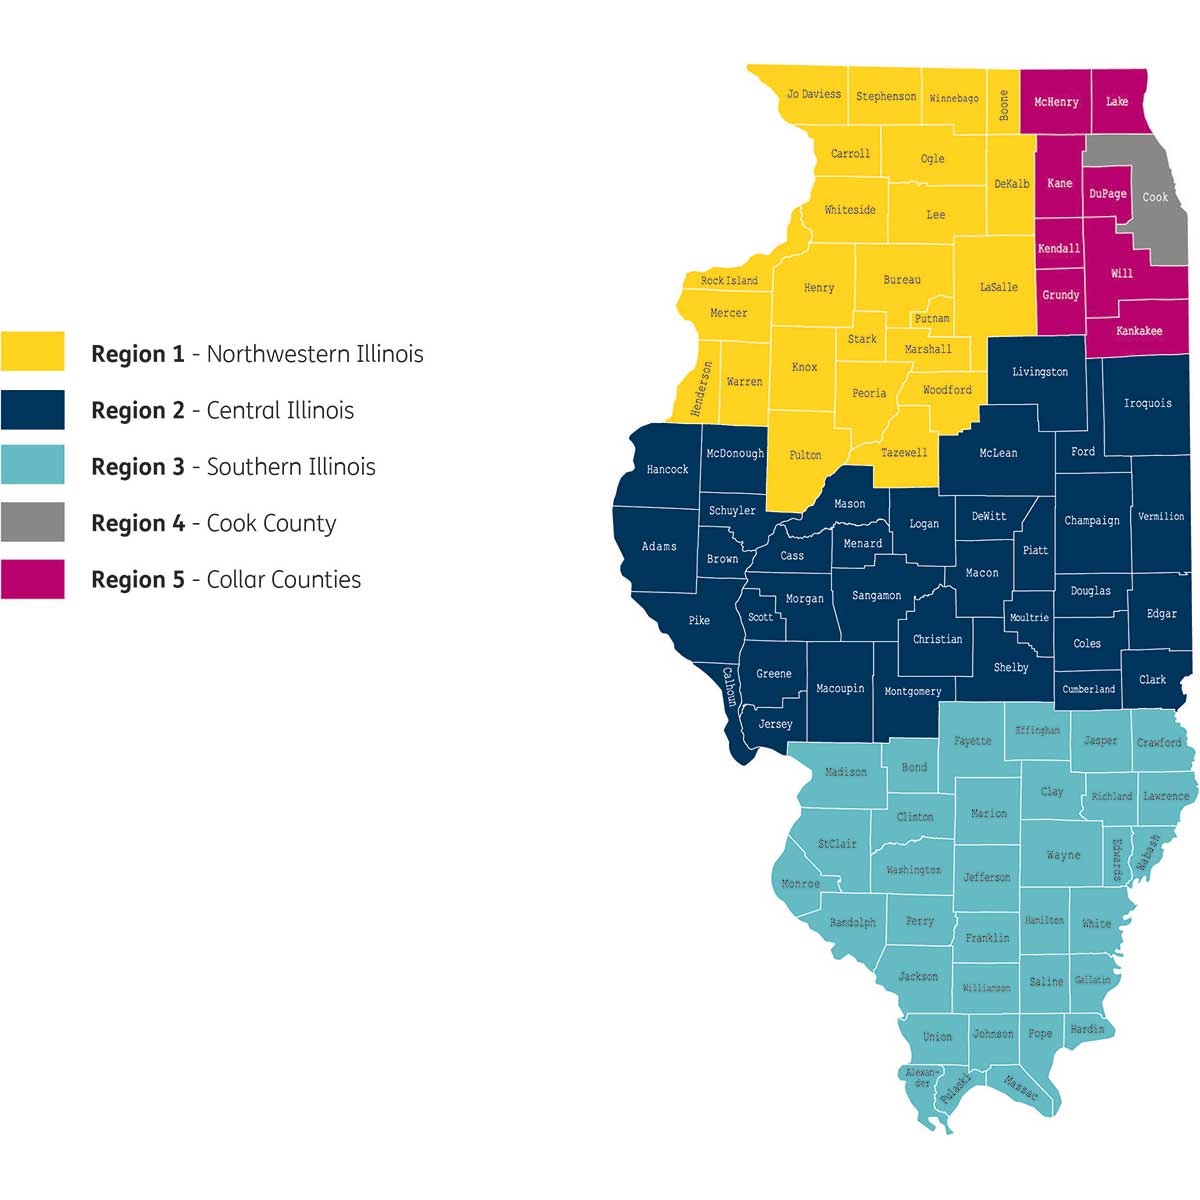 Map of Illinois regions] [alt text: map of Illinois regions covered by Humana Medicaid